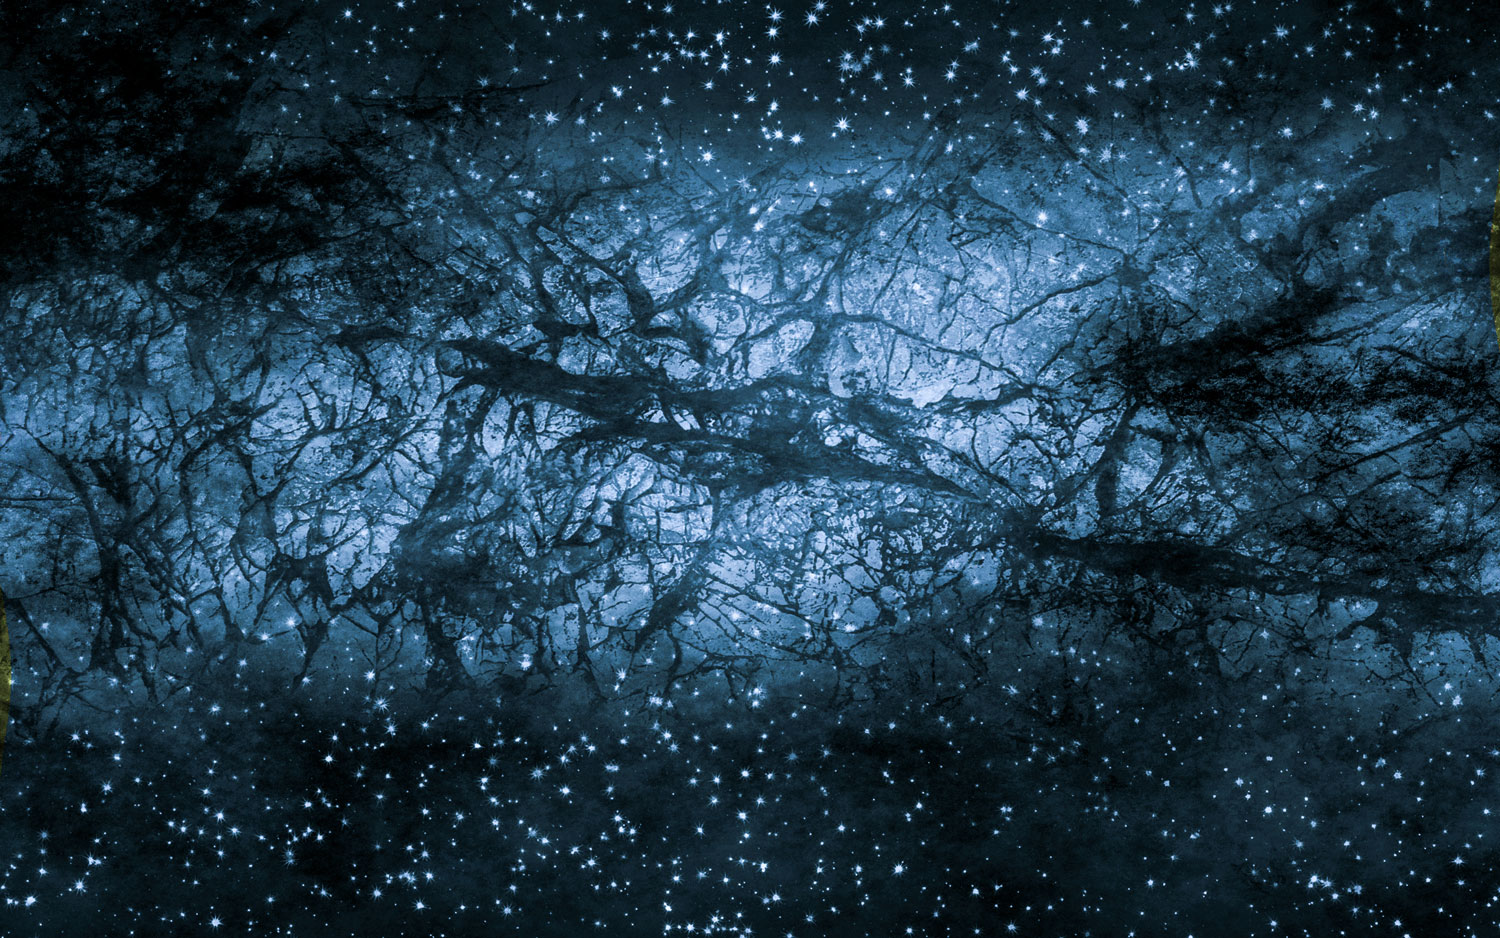 An illustration of what Dark Matter may look like.